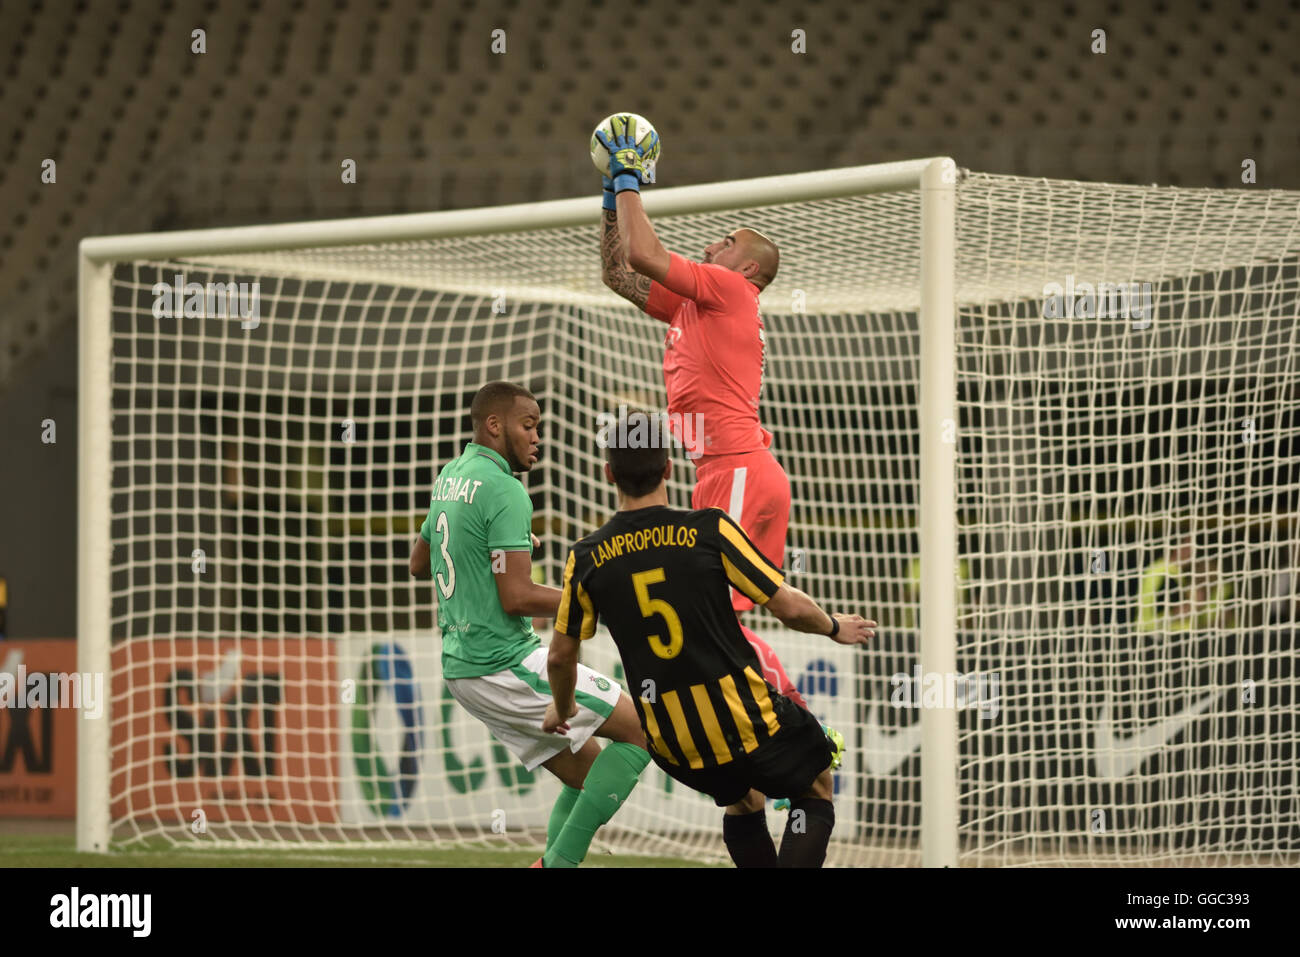 Athens, Greece. 04th Aug, 2016. Ruffler Stephane (no 16), goalkeeper of Saint-Etienne catch the ball. The goal of Robert Berits in the 22nd minute in OAKA was enough for the french football team Saint-Etienne (green and white appearance) to earn the qualification against the greek football team AEK (yellow and black appearance), despite the fact that the greek team was better in most duration of the game, but encountered a serious problem in the final effort. Final score AEK- 0, while Saint Etienne got 1. © Dimitrios Karvountzis/Pacific Press/Alamy Live News Stock Photo